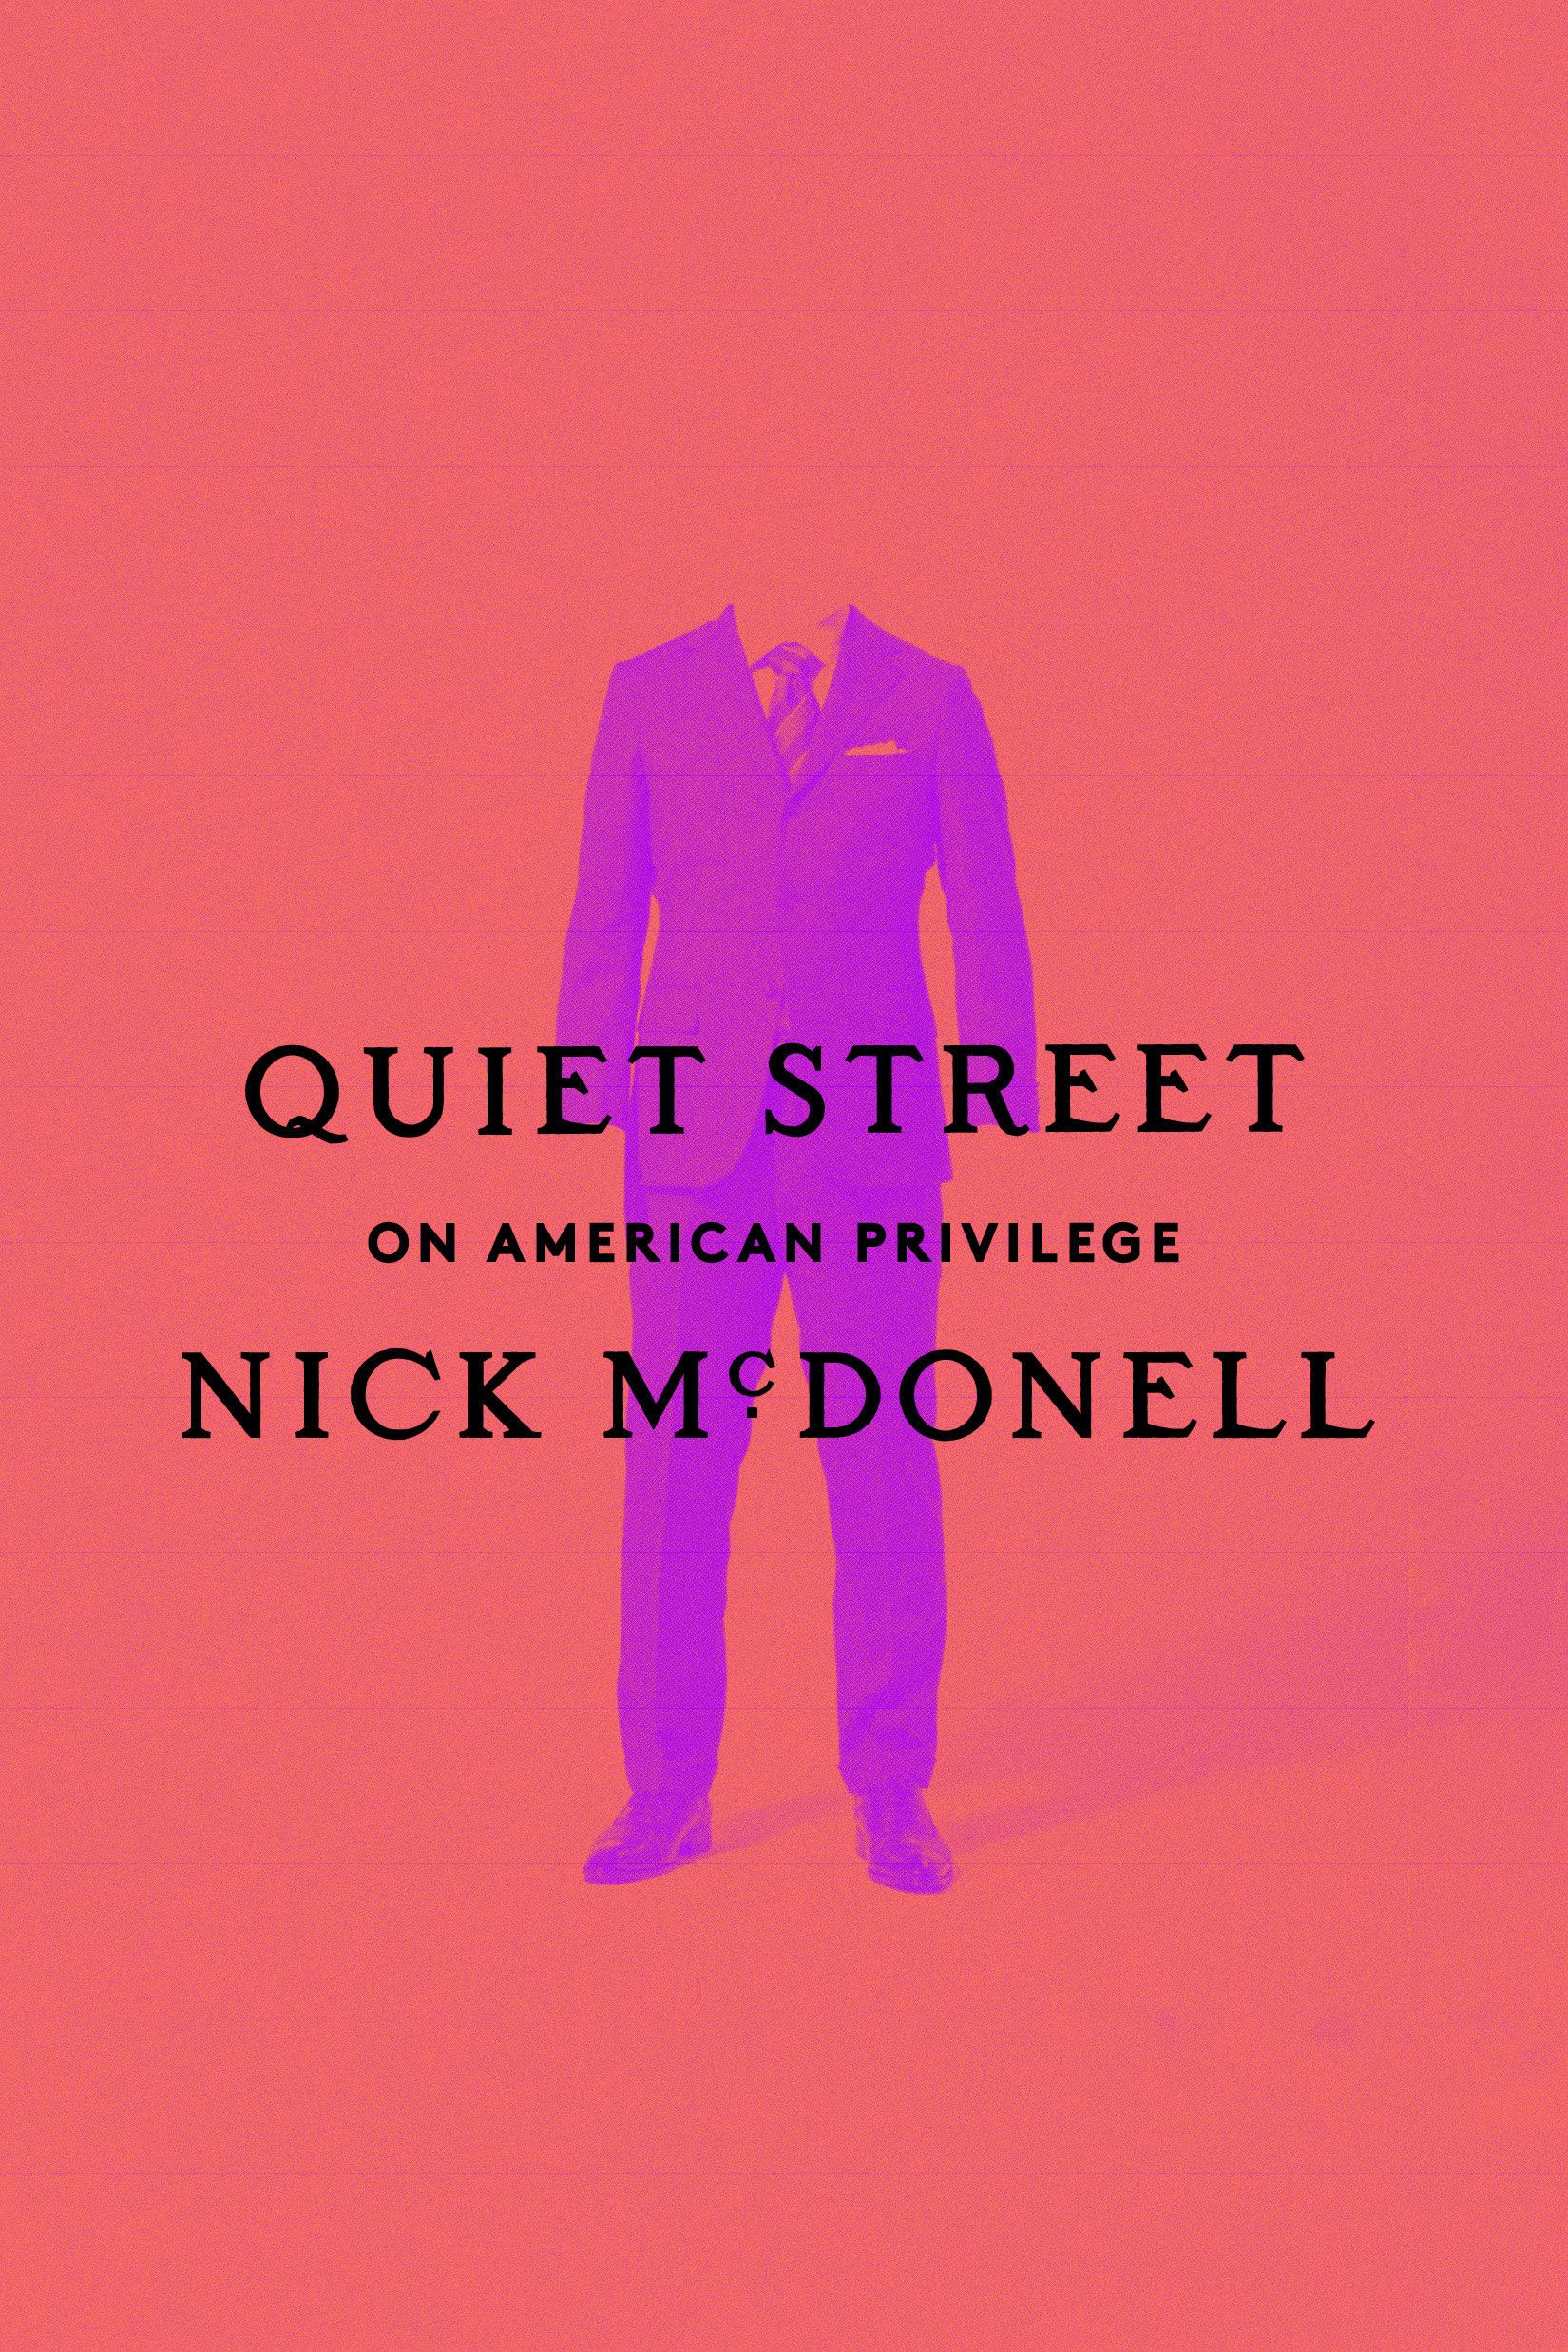 The cover of Quiet Street: On American Privilege